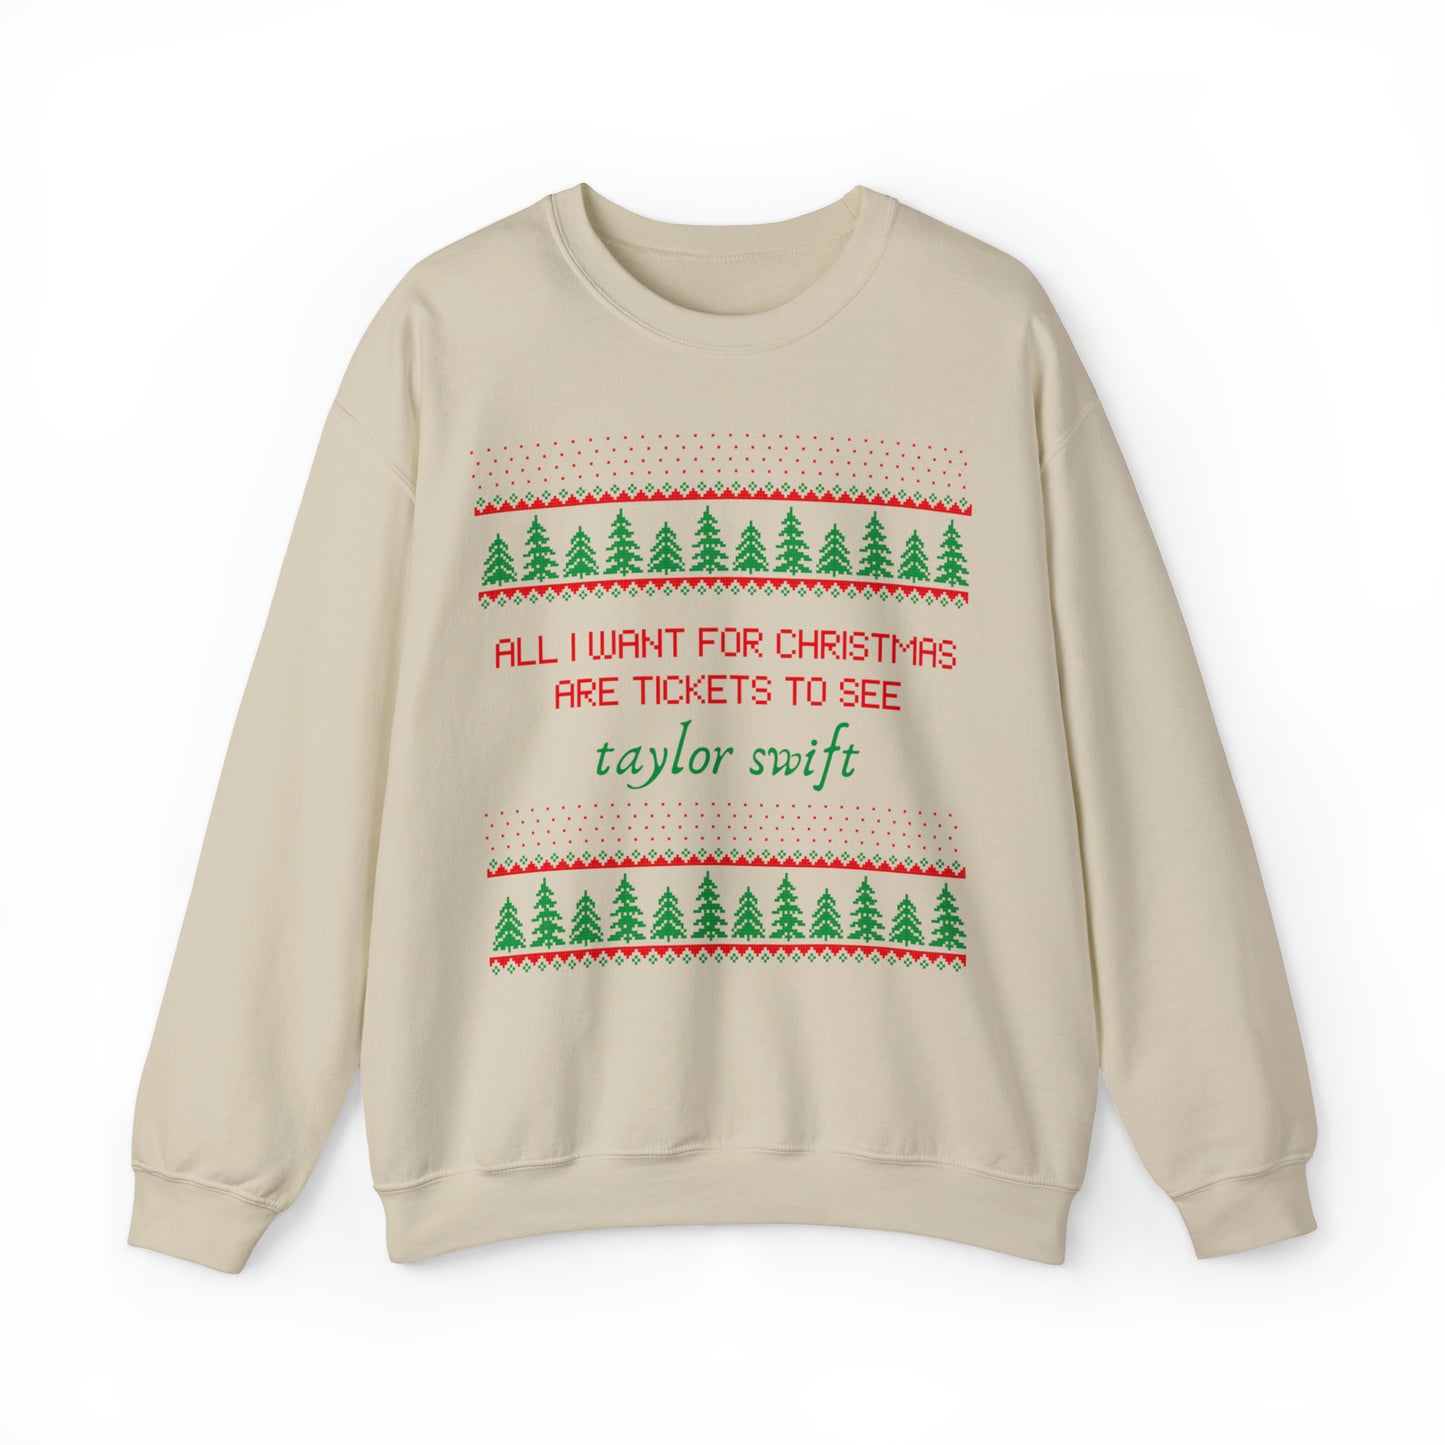 All I Want For Christmas Are Taylor Swift Tickets Christmas Sweater